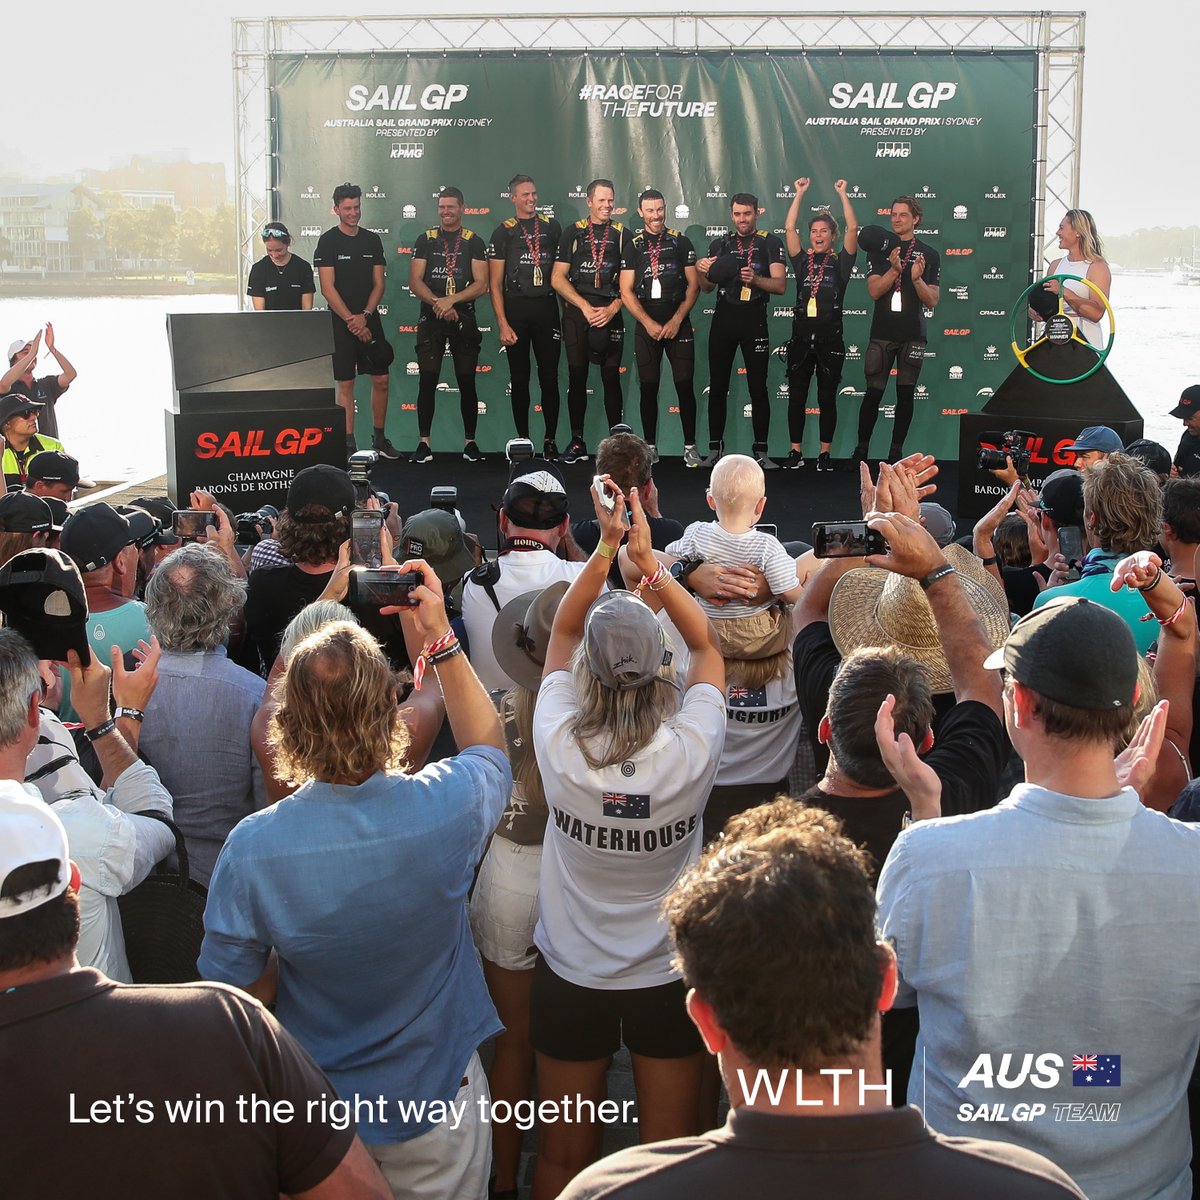 Celebrating our partners, the Australian SailGP team as they race through the middle of another promising Season 4 campaign. You make us proud on and off the water! #sailgp #poweredbynature #loansfortheoceans